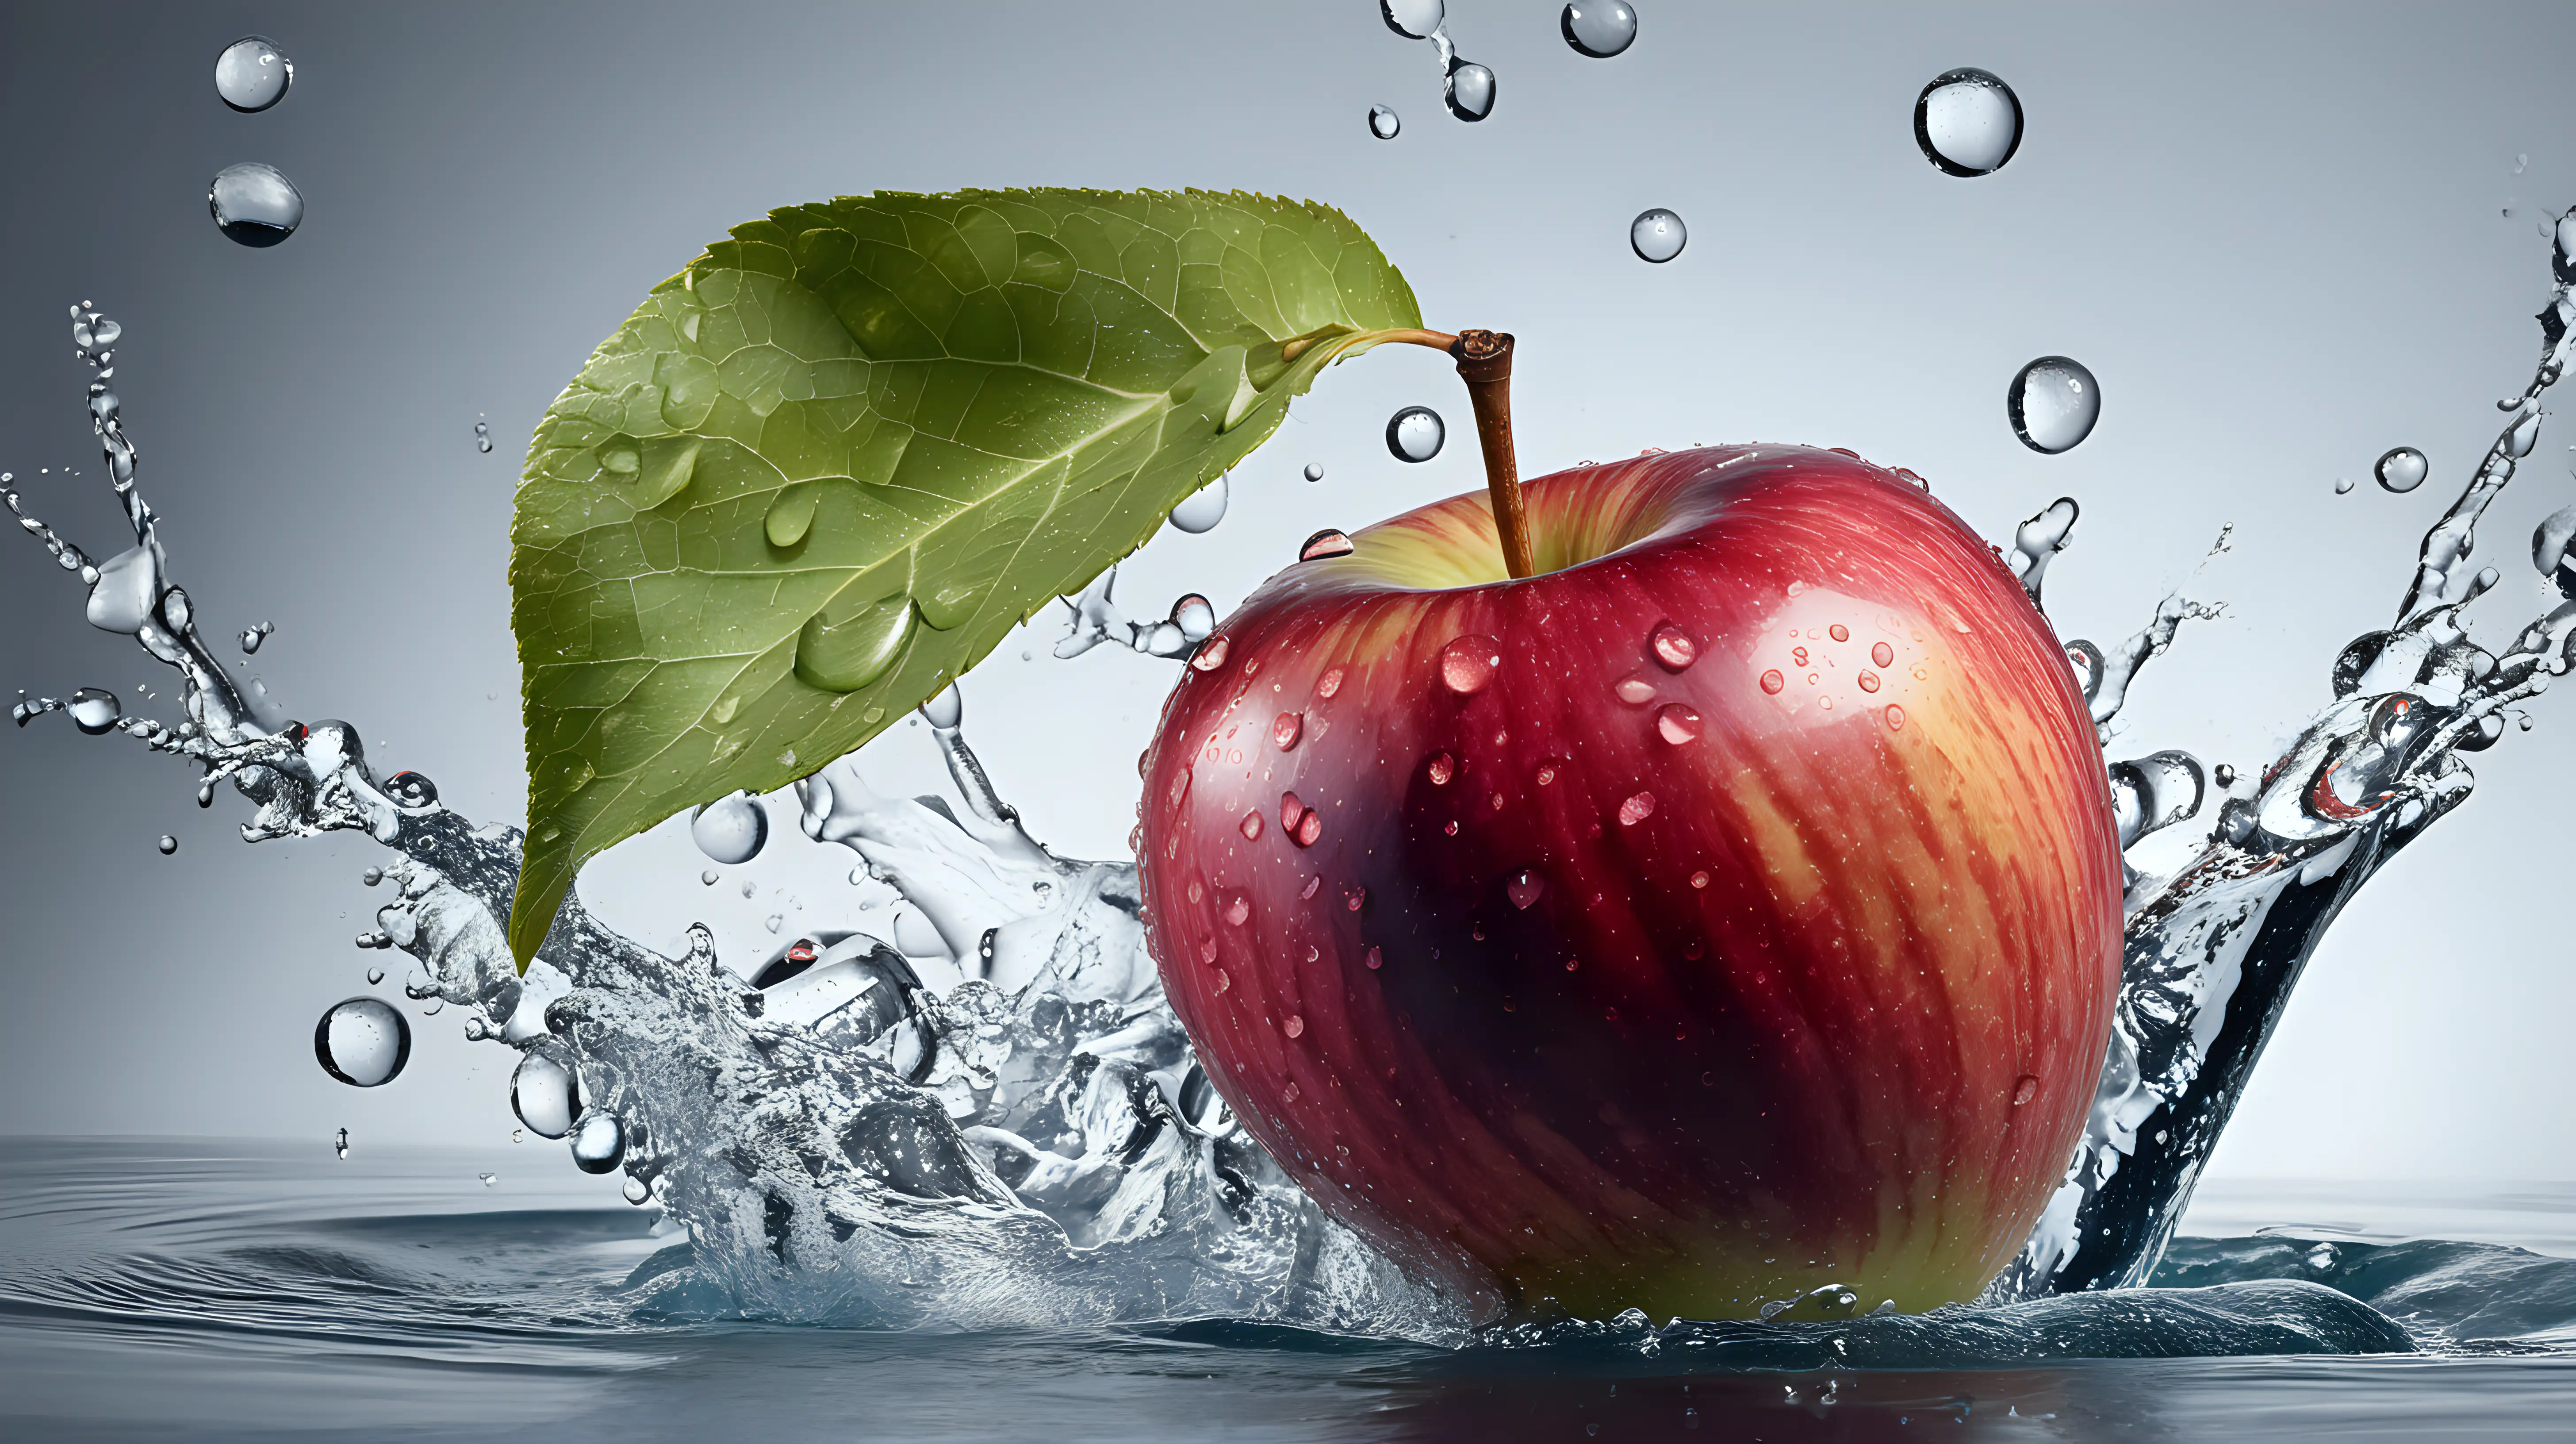 Dynamic Composition: Introduce a slight tilt or angle to the apple, breaking away from a traditional centered composition. Emphasize the unique positioning of the single leaf and water droplets for a more dynamic visual effect.



